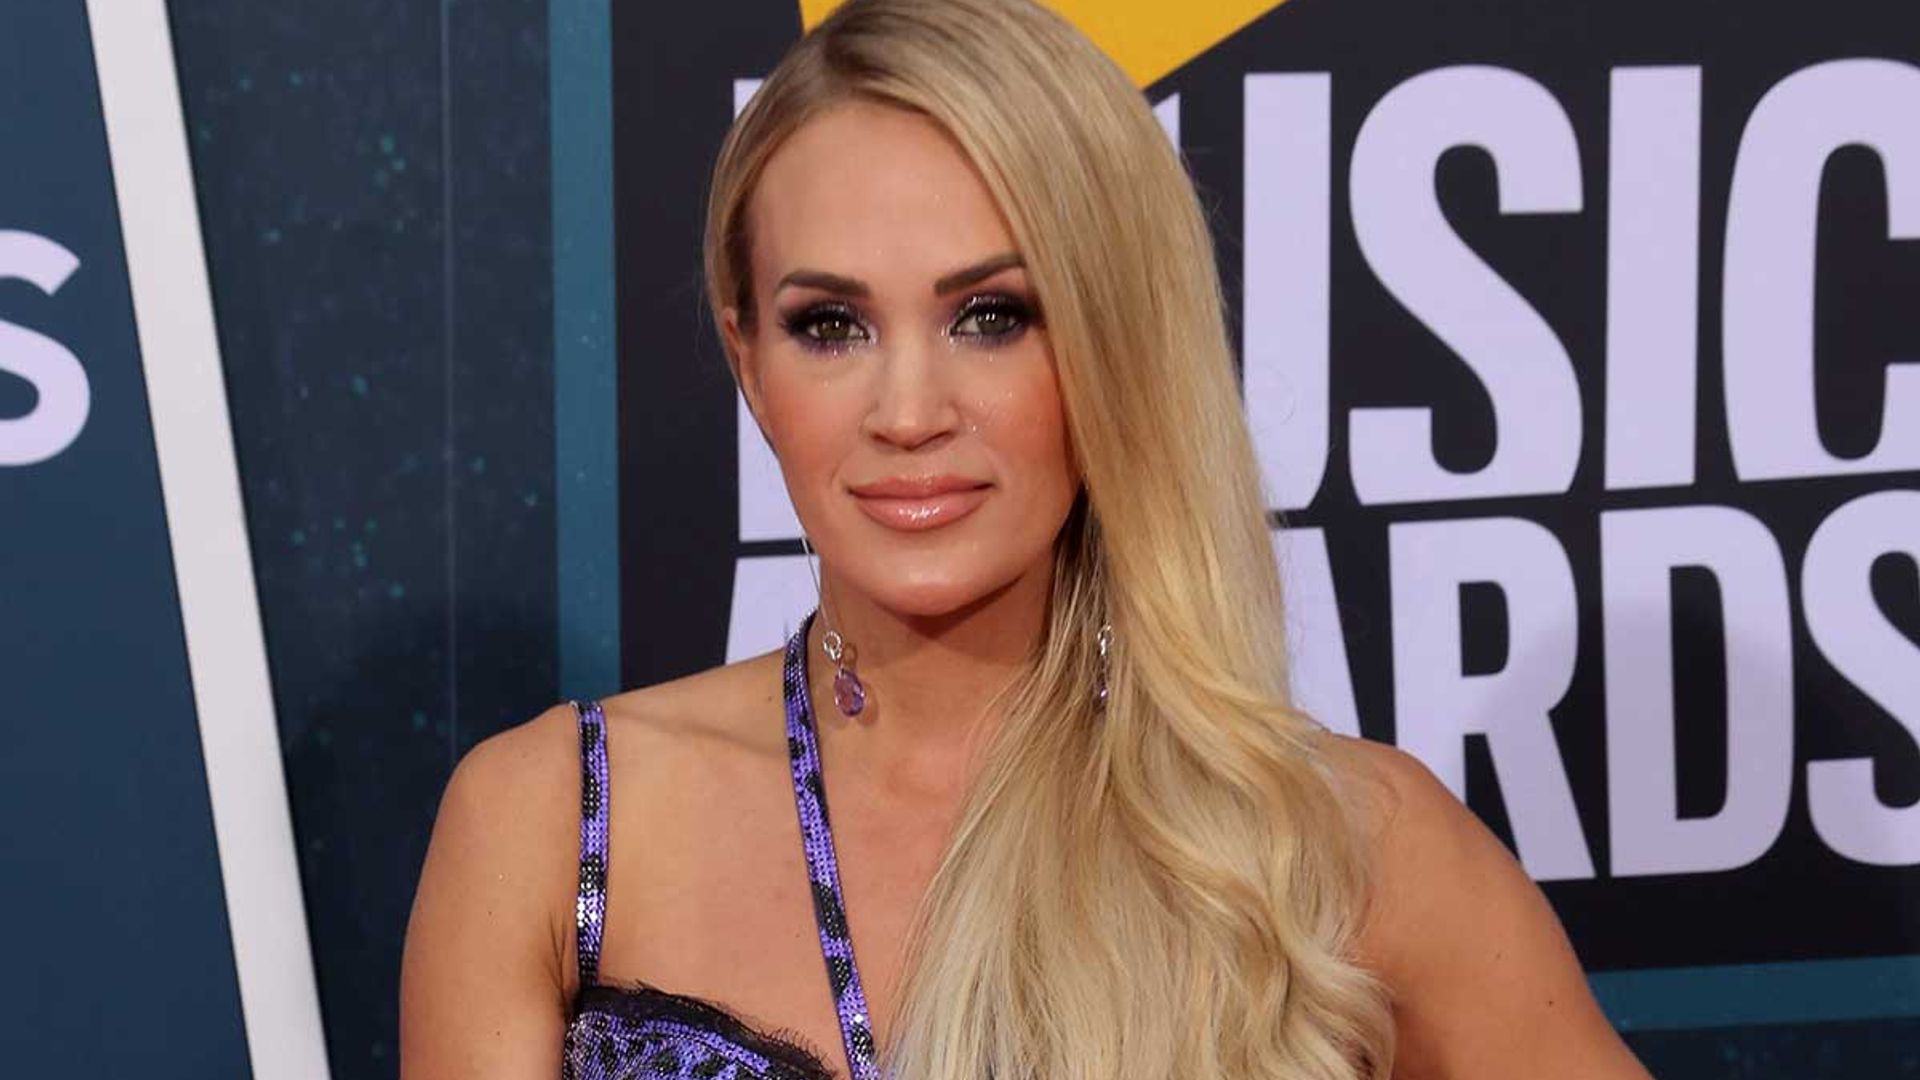 Carrie Underwood makes a stunning statement in micro mini dress